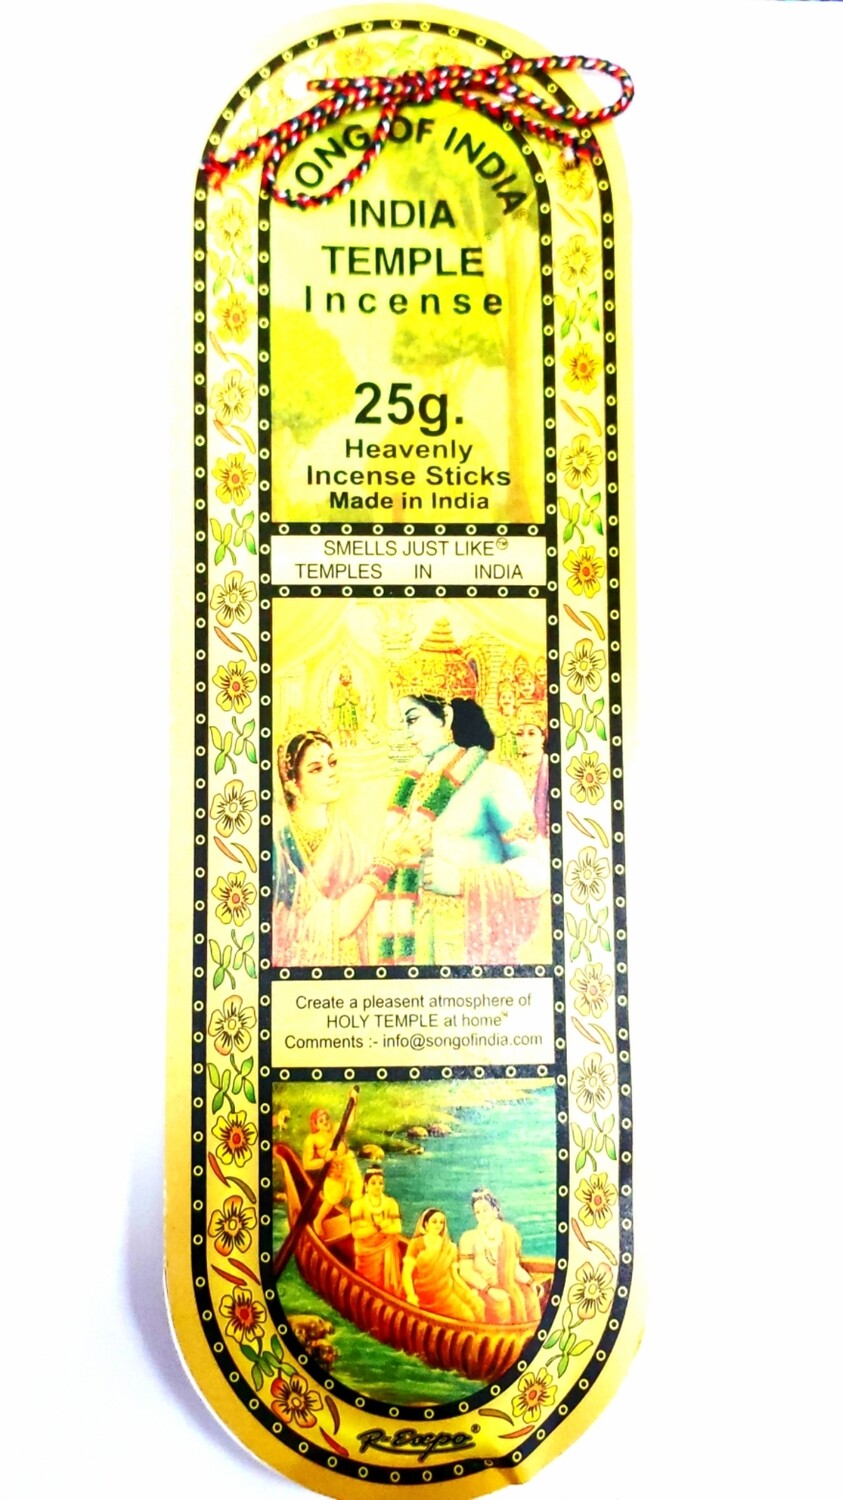 Song of India: Indian Temple Incense